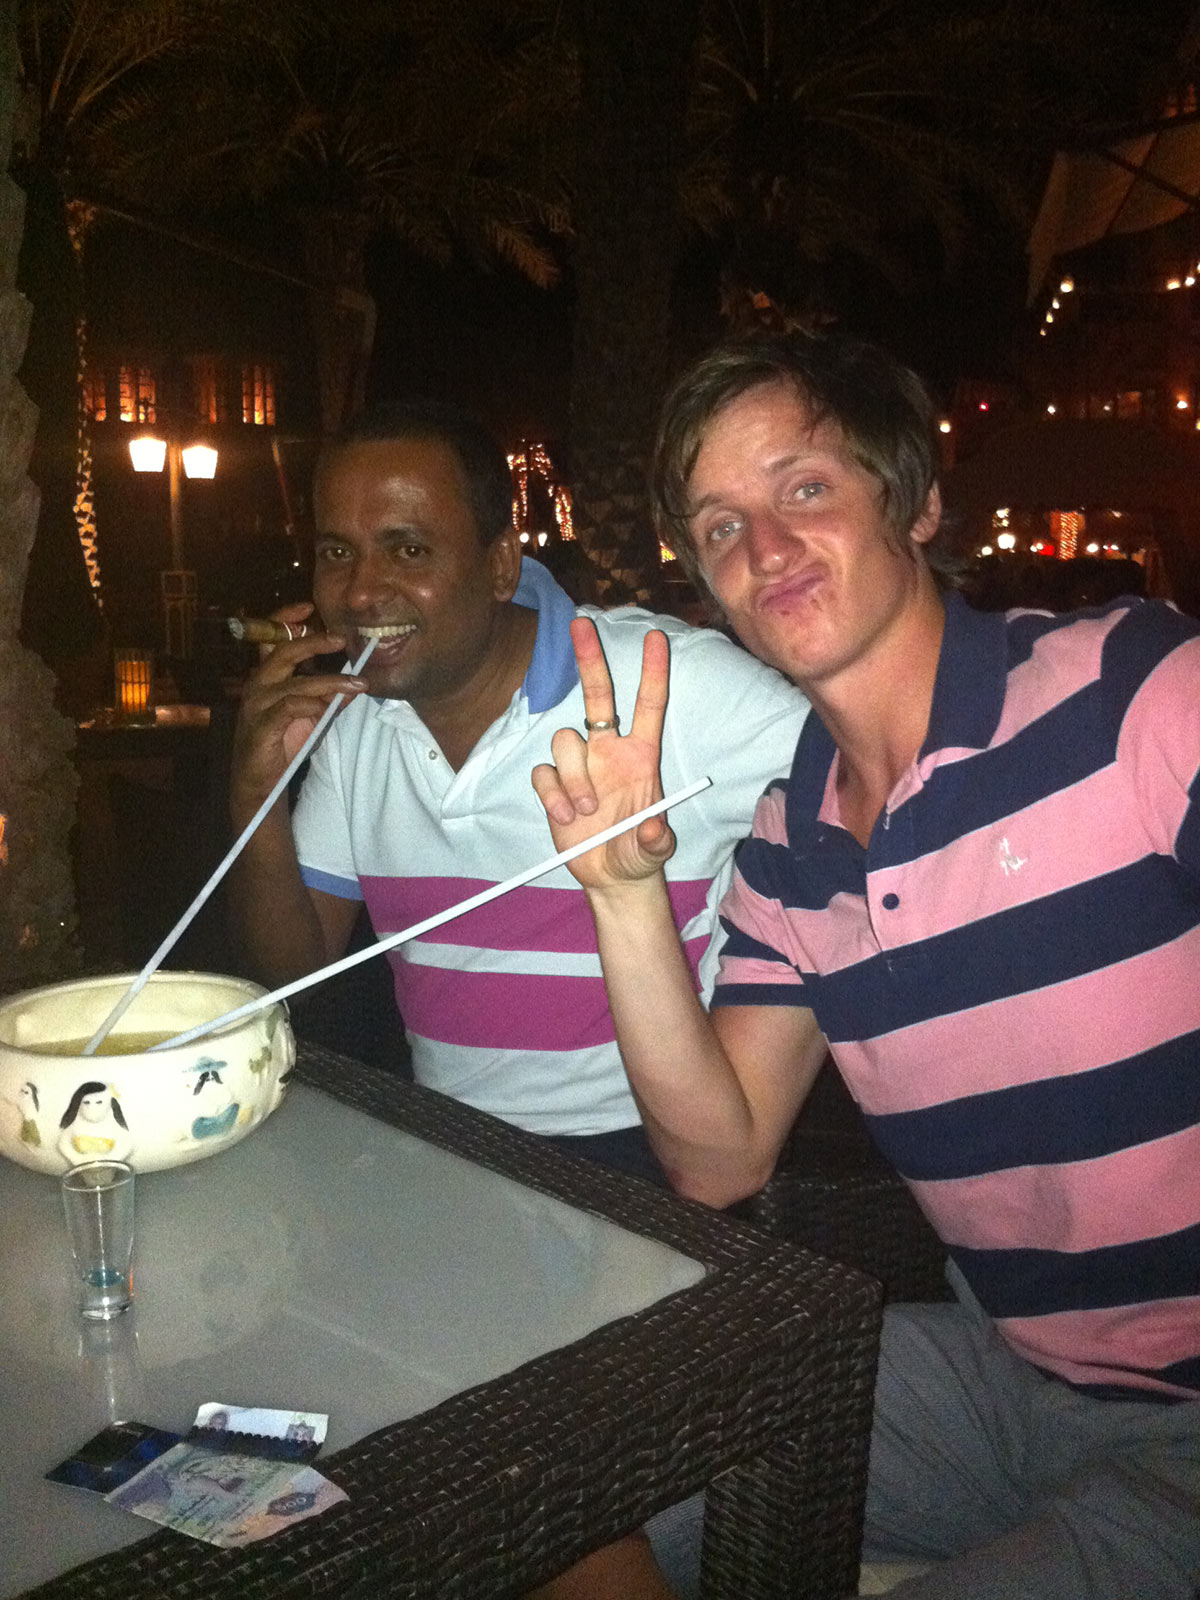 David Simpson with a guy in Dubai. Staying on the palm in Dubai